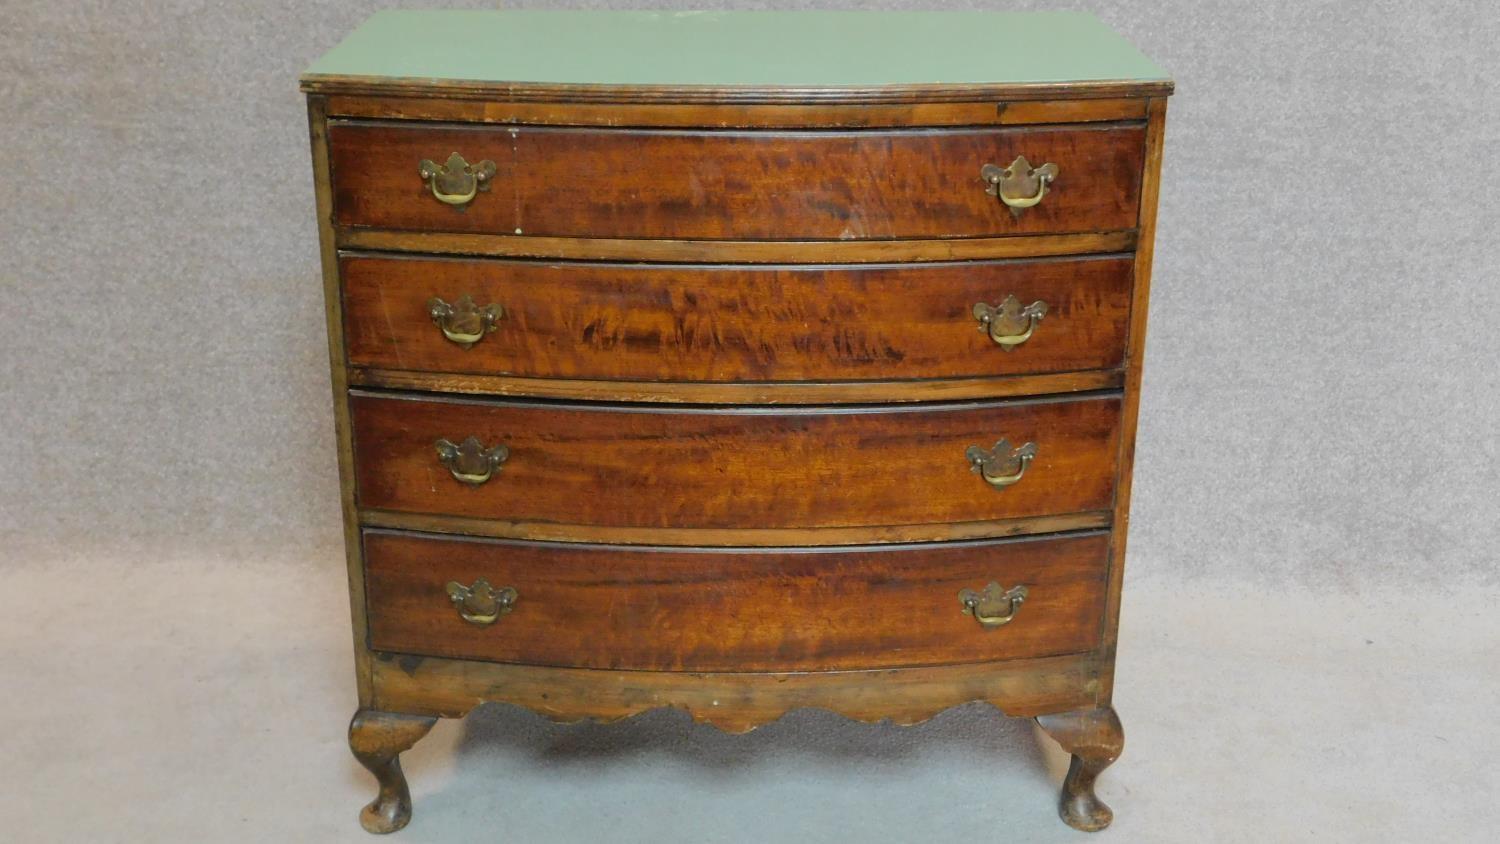 A mid 20th century mahogany Georgian style bowfront chest of drawers. H.84 W.83 D.46cm